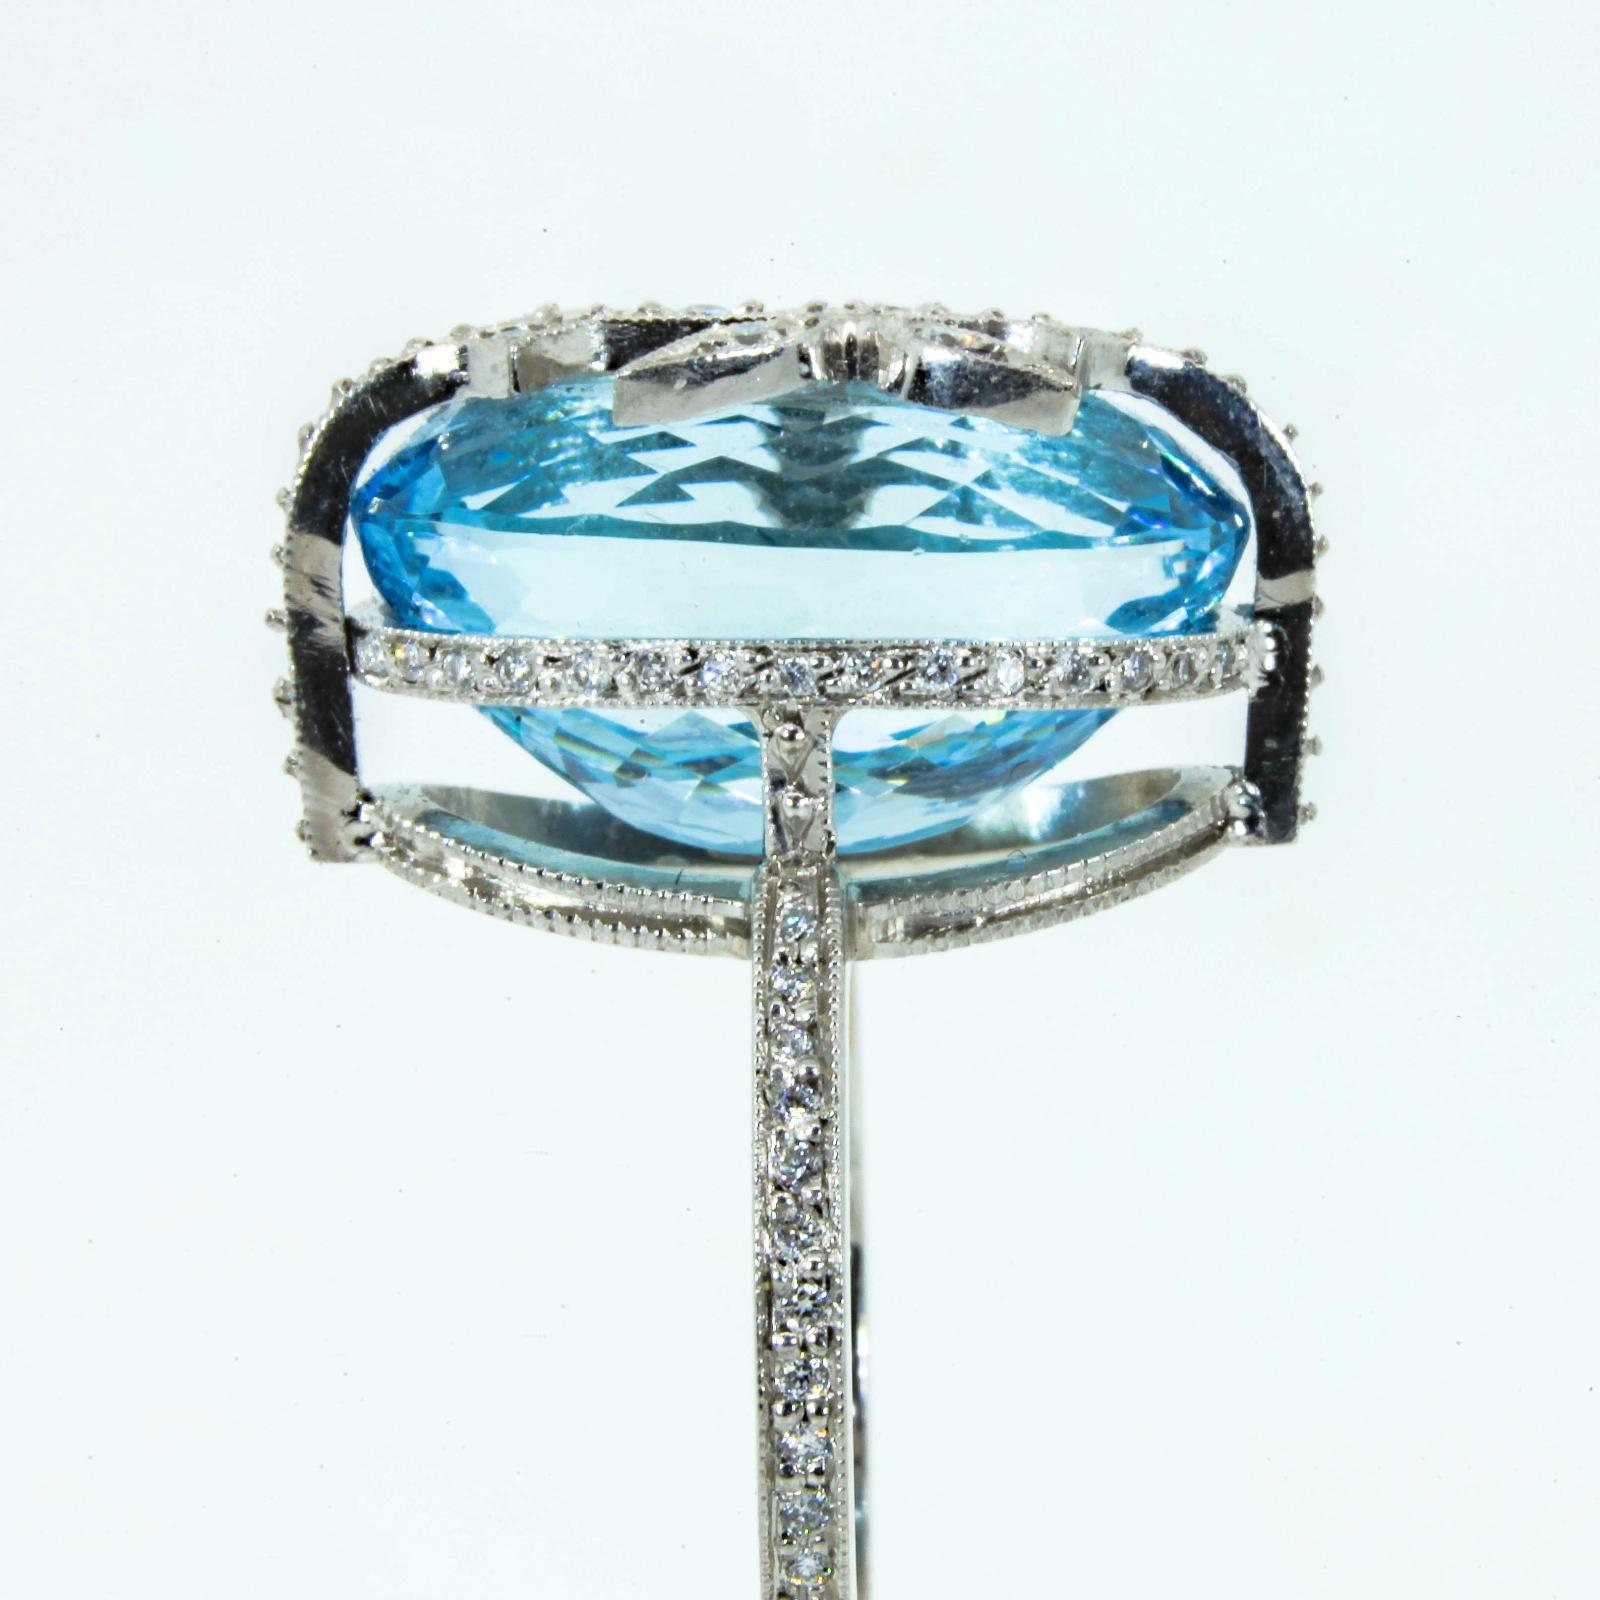 Fashionably Lovely, Cathy Waterman's  platinum ring flaunting an 8.00 carat oval blue Topaz.   The topaz is embraced in a diamond  micro pave setting, accented with Round Brilliant Cut Diamonds.  Ring size 6 3/4.  